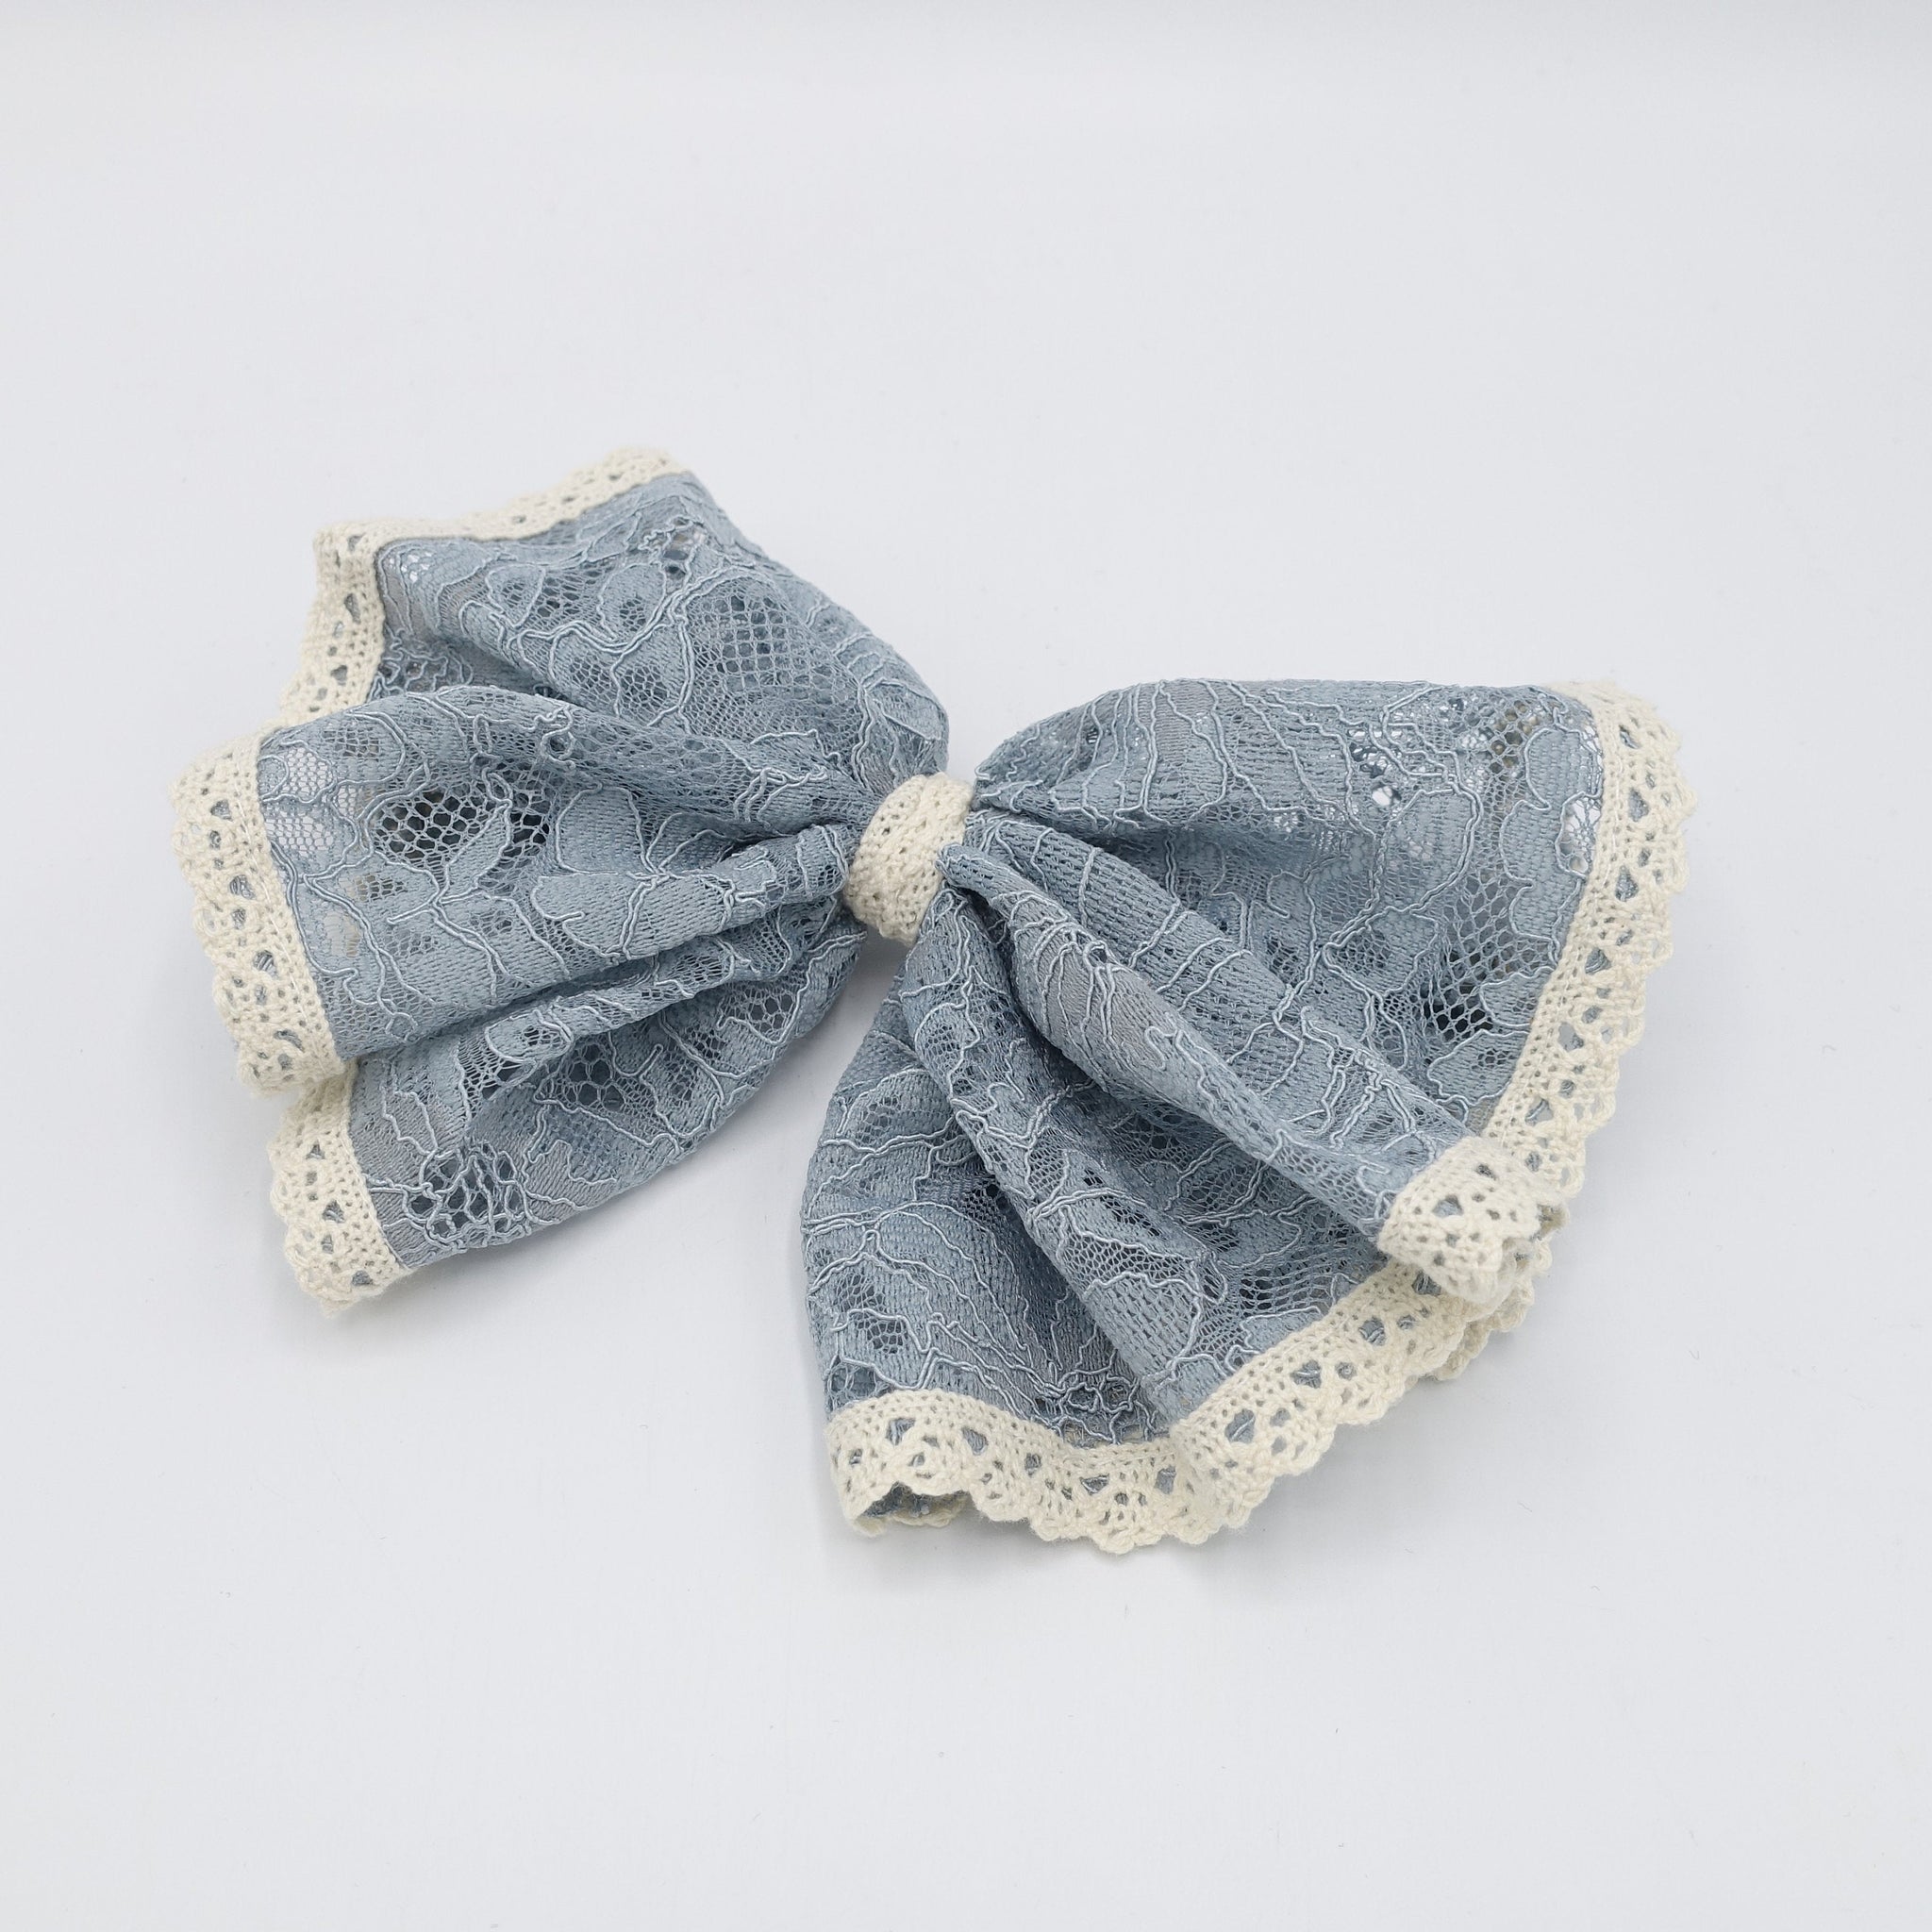 VeryShine two tone floral lace hair bow layered hair accessory for women